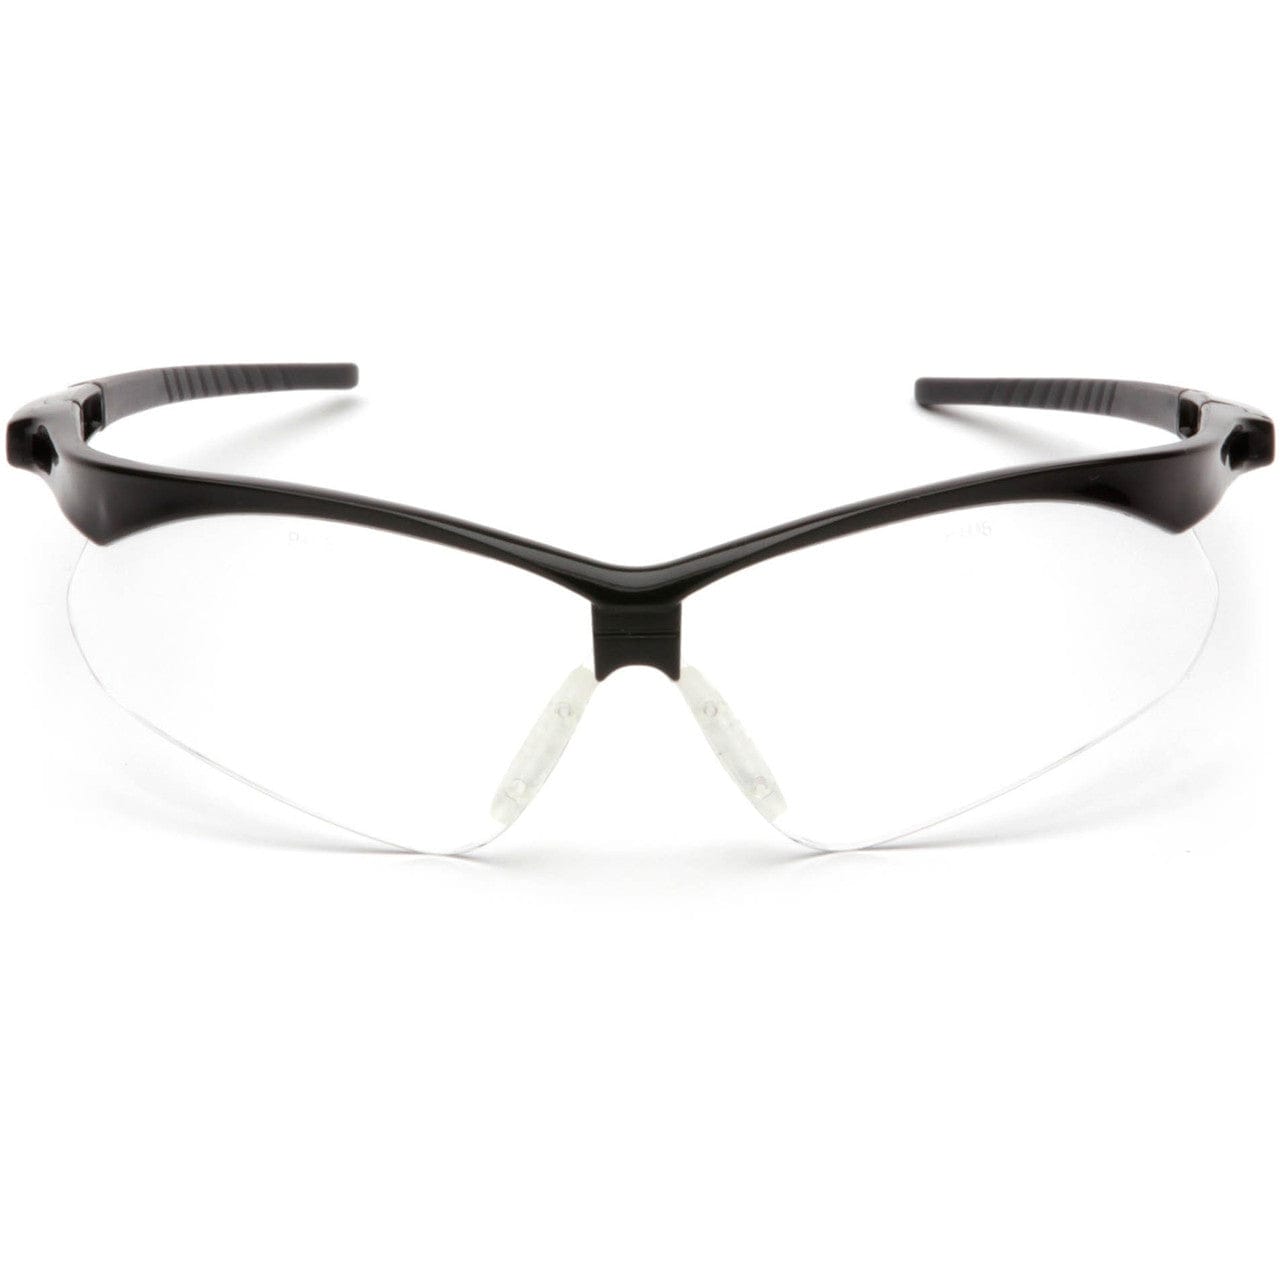 Pyramex PMXtreme Safety Glasses with Black Frame and Clear Lens Front View